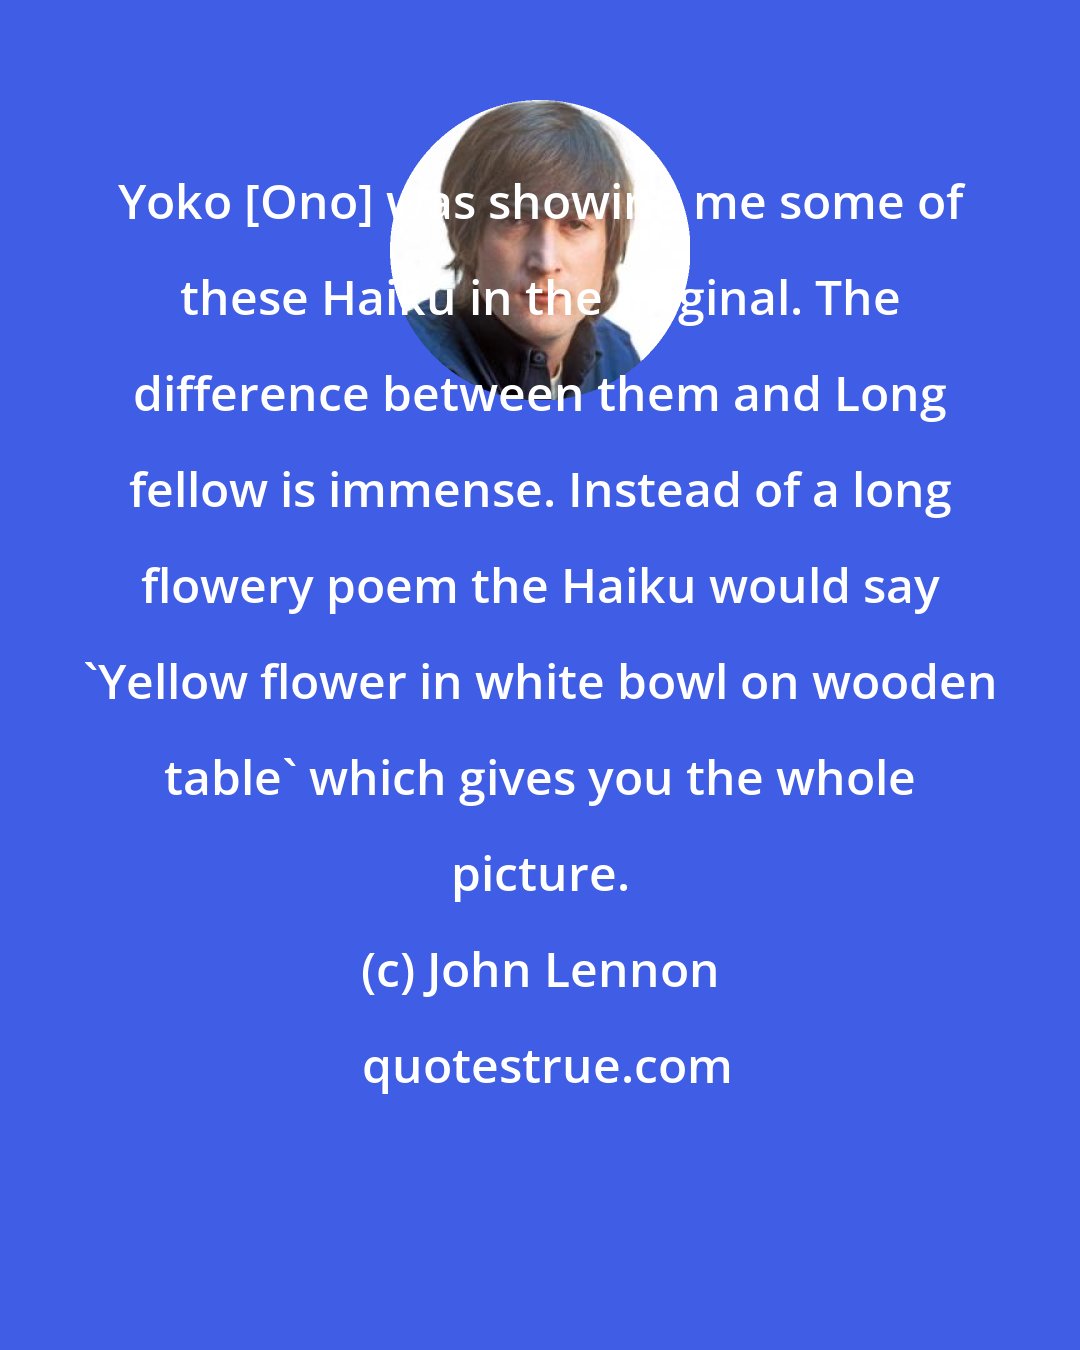 John Lennon: Yoko [Ono] was showing me some of these Haiku in the original. The difference between them and Long fellow is immense. Instead of a long flowery poem the Haiku would say 'Yellow flower in white bowl on wooden table' which gives you the whole picture.